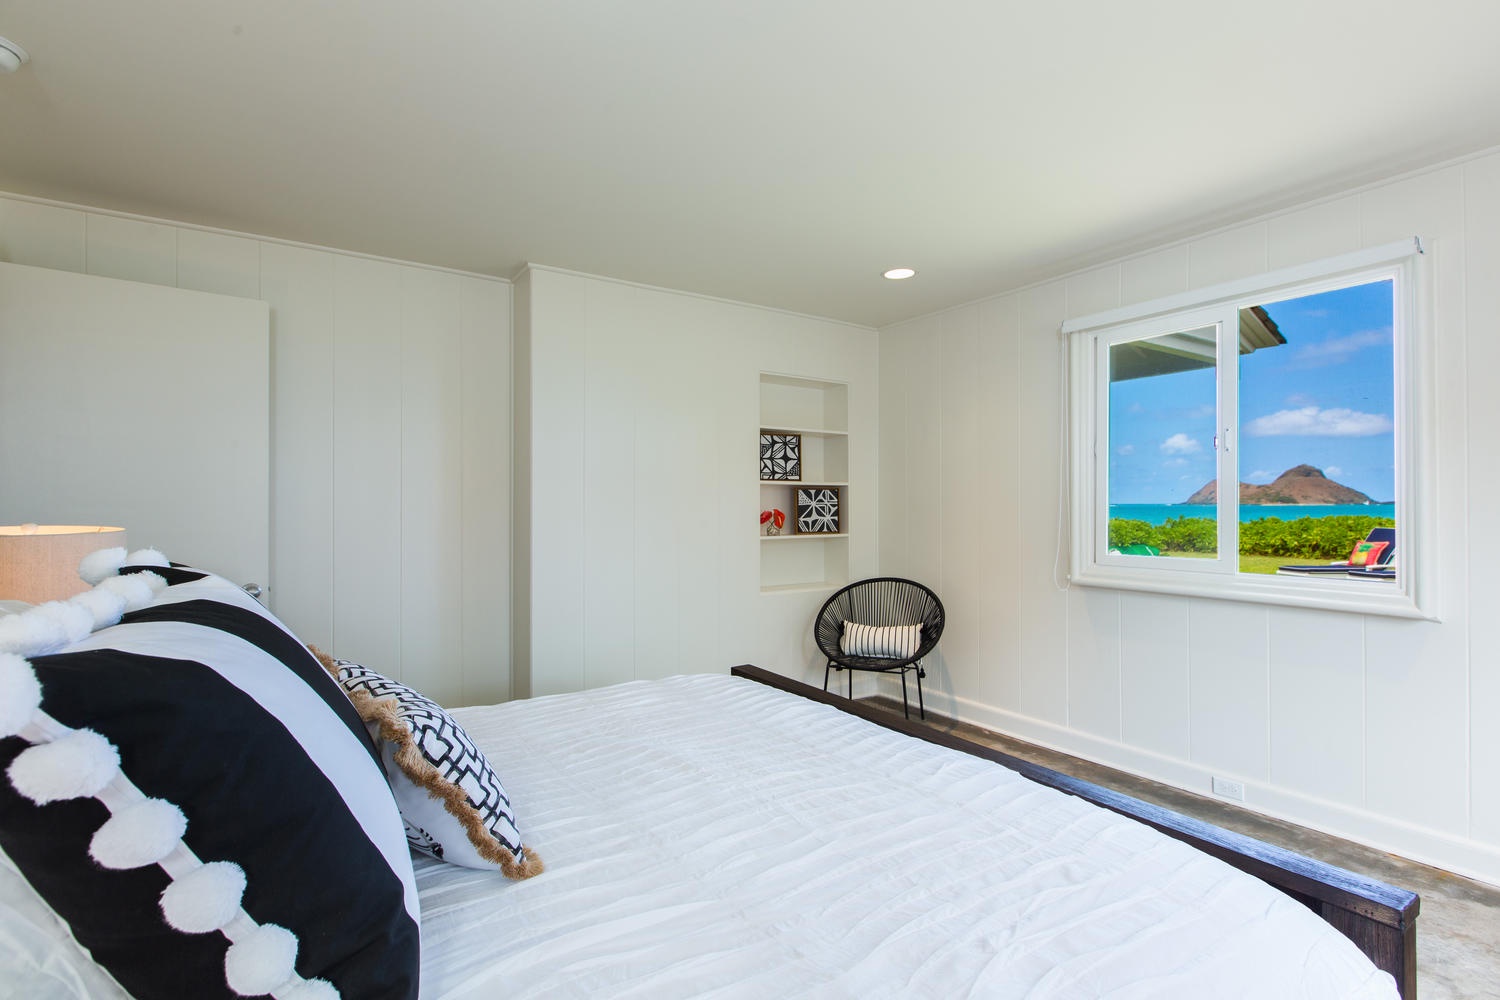 Kailua Vacation Rentals, Lanikai Oceanside 4 Bedroom - Primary bedroom with a view!